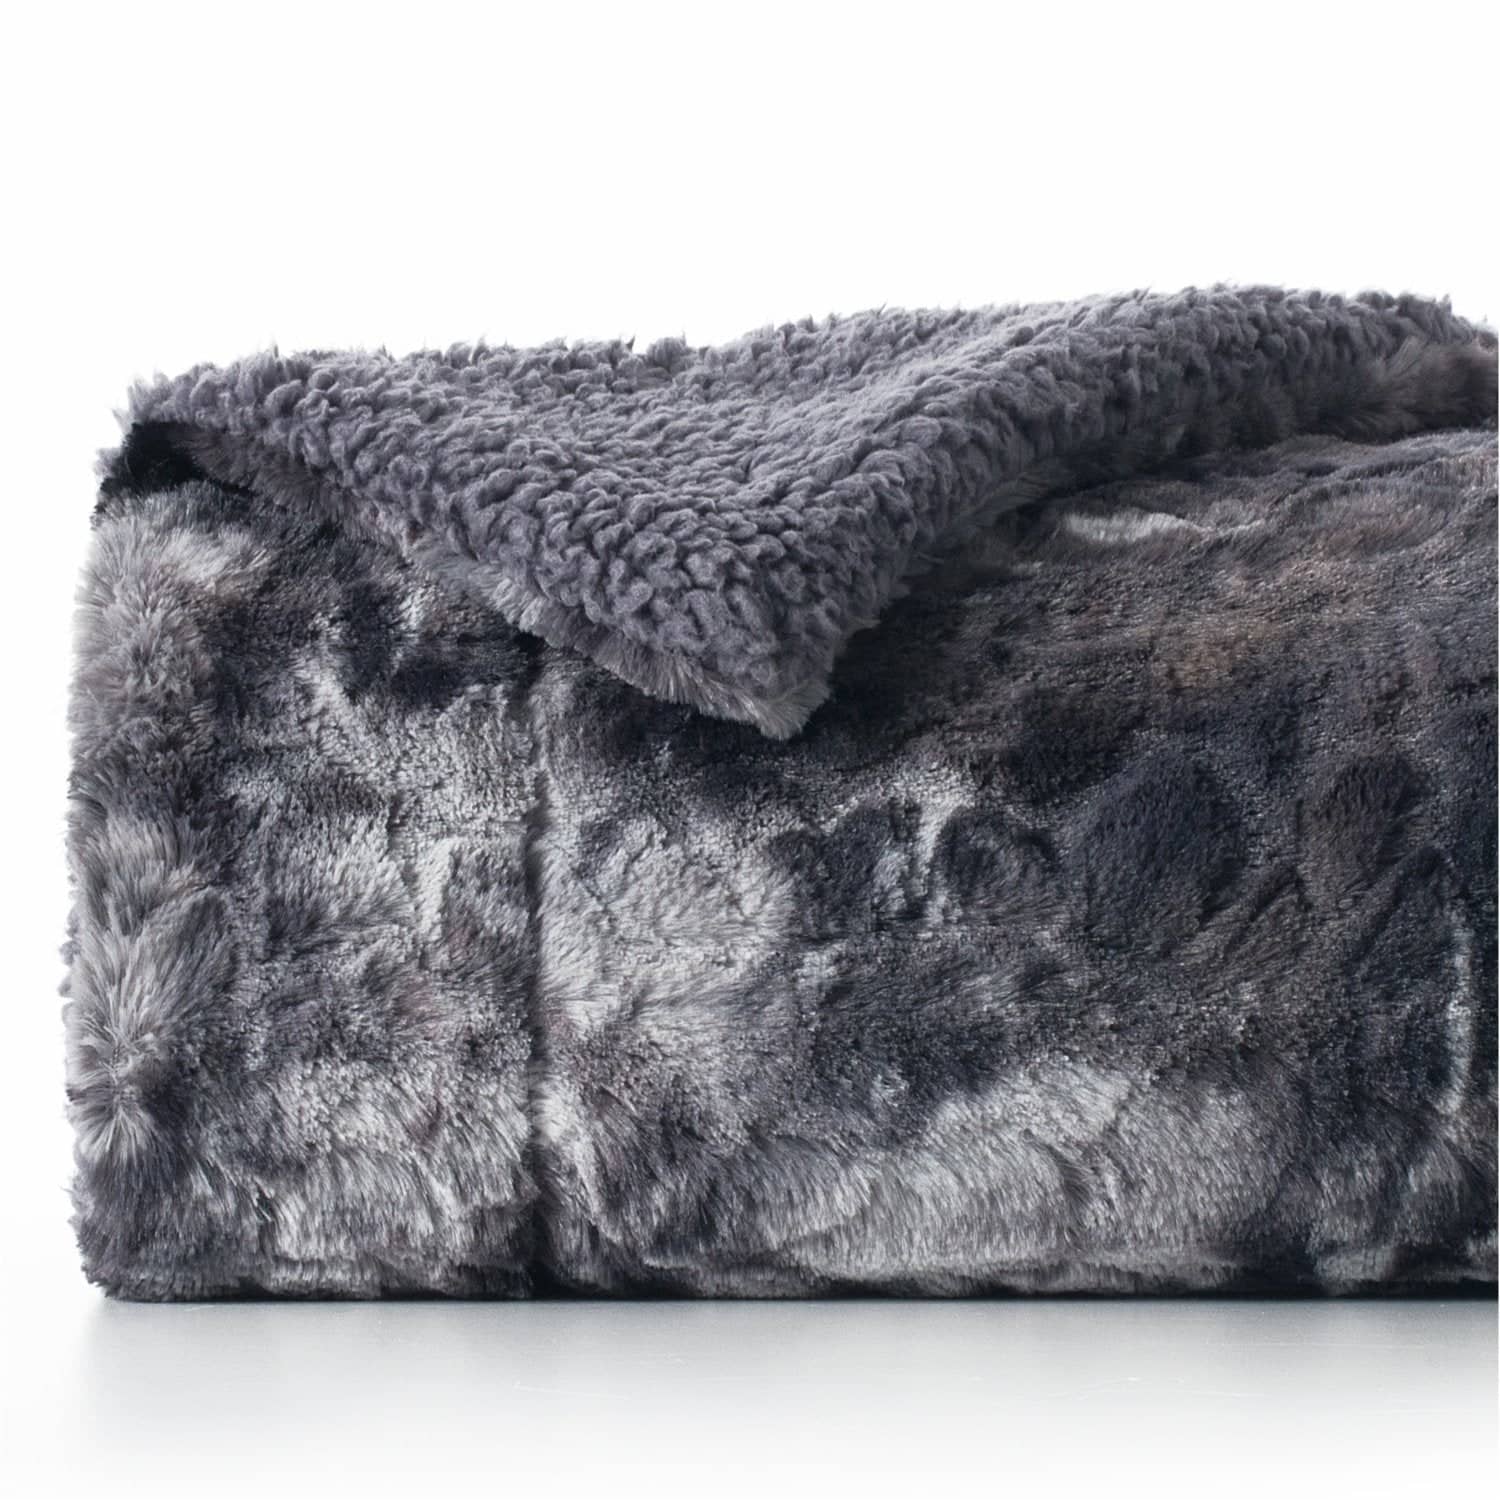 Faux Fur and Sherpa Shaggy Blanket soft life